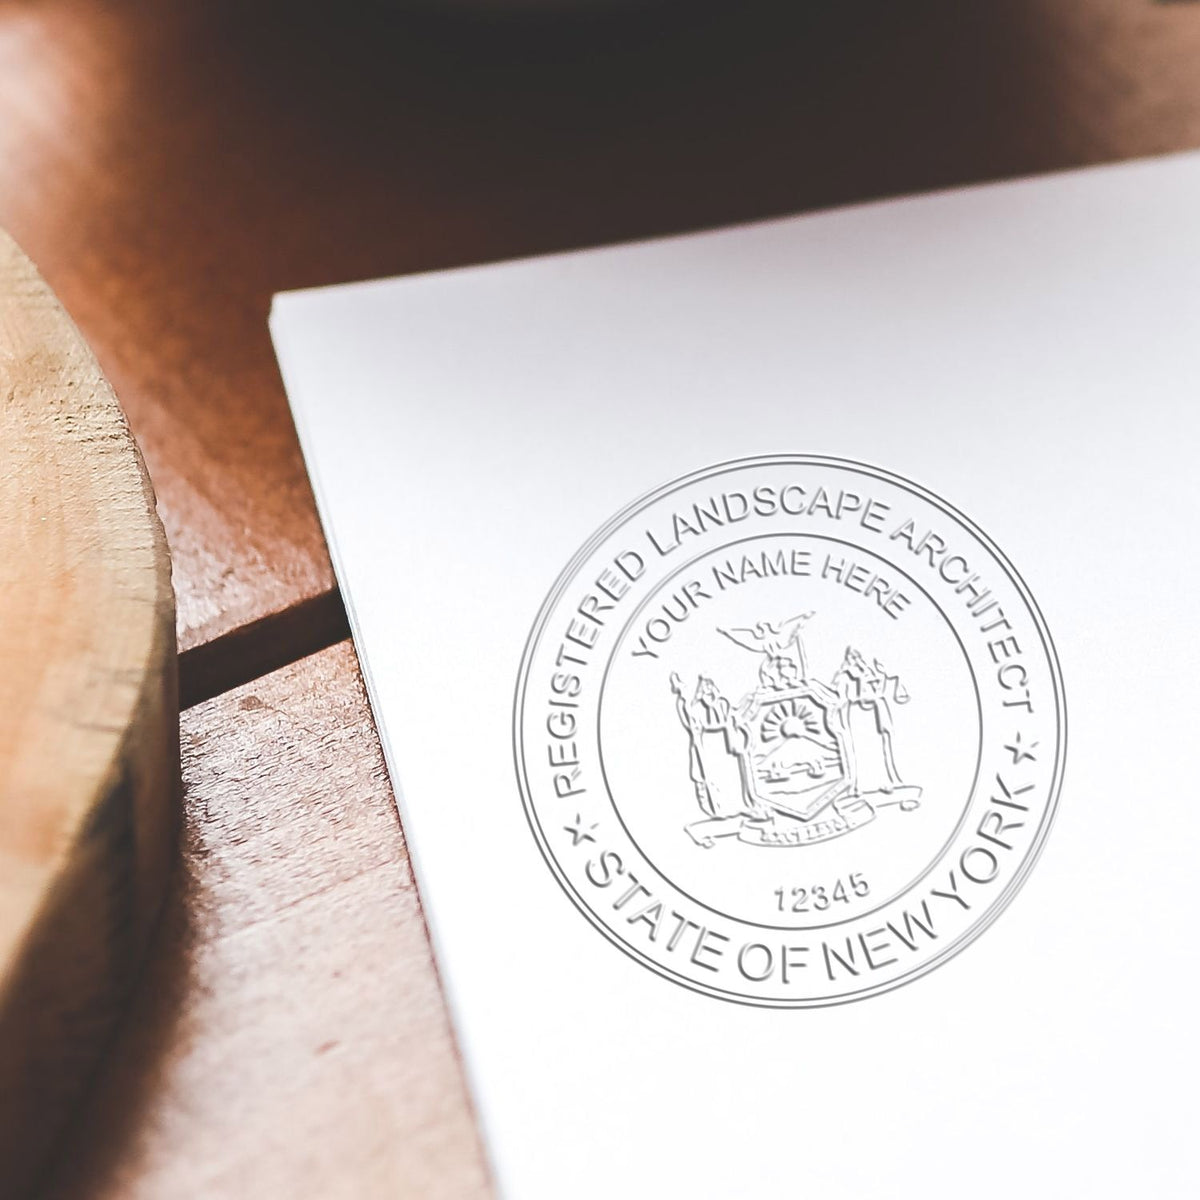 Another Example of a stamped impression of the Hybrid New York Landscape Architect Seal on a office form